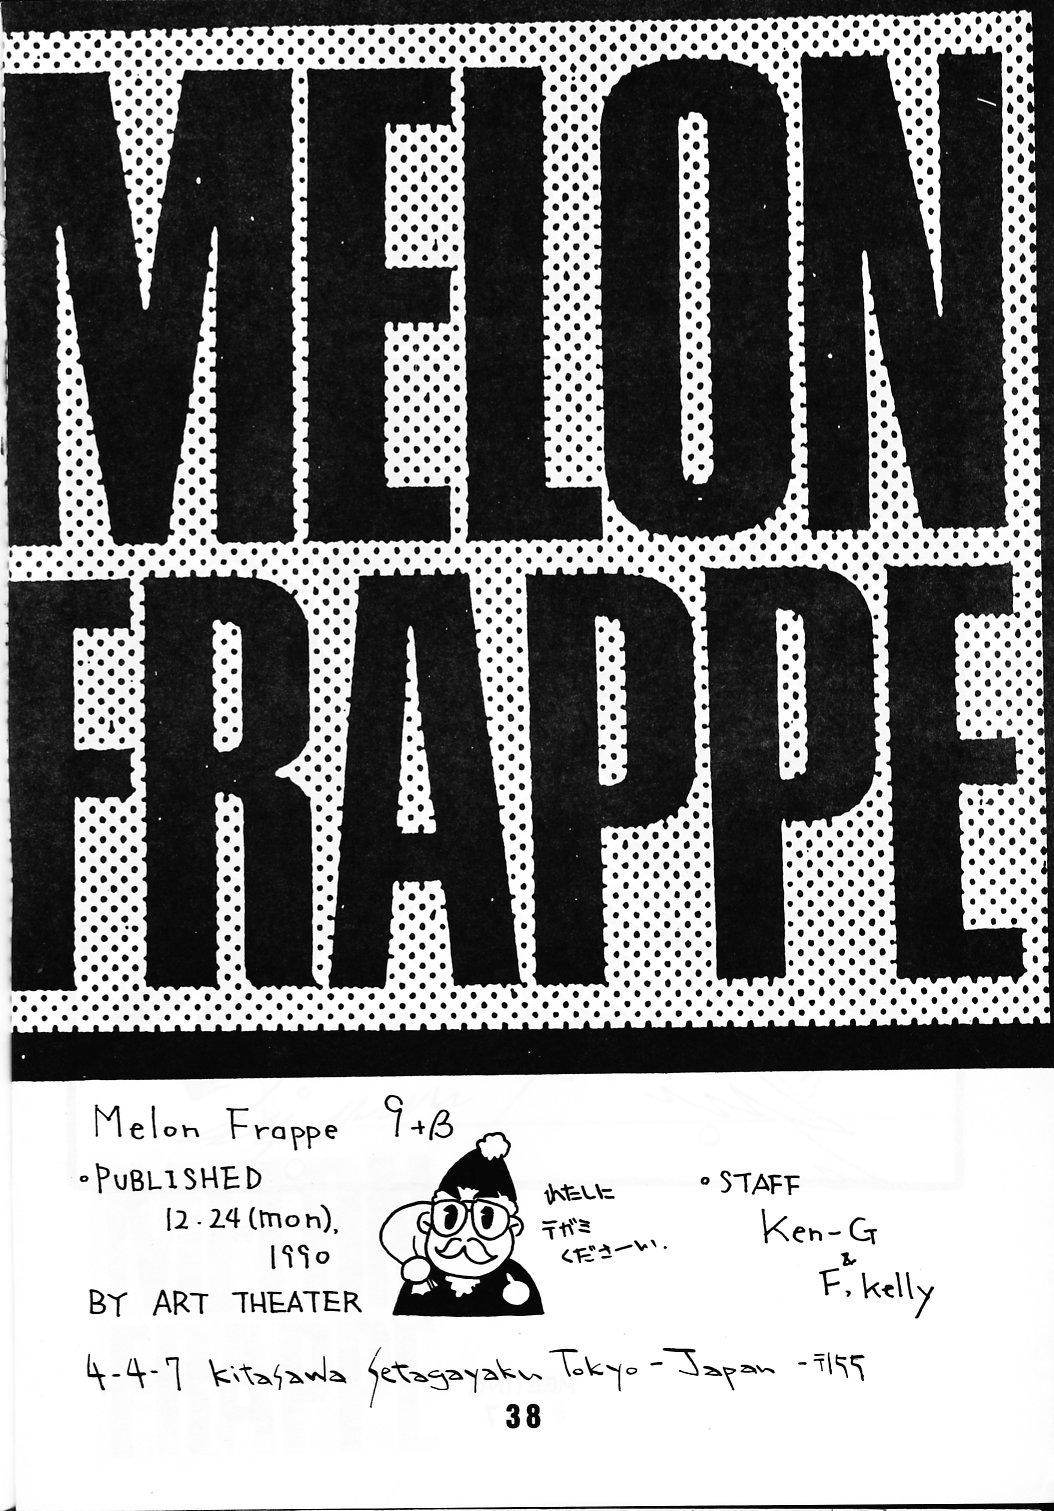 [art theater(フレッドケリー)] melon frappe patabor special2 